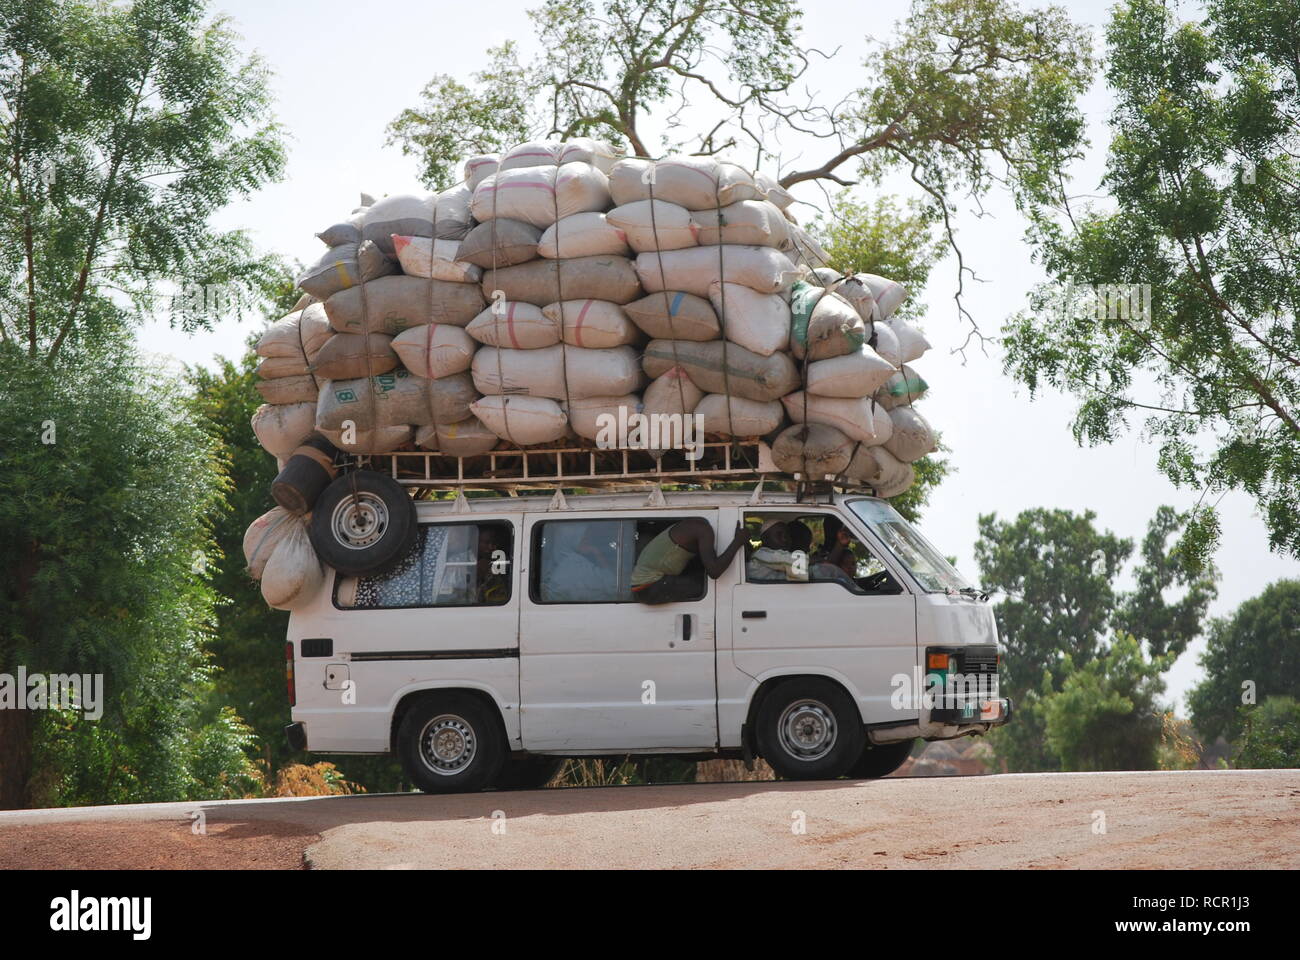 Africa Burkina Faso View Of Overloaded African Taxi With People Sitting On  Roof High-Res Stock Photo - Getty Images